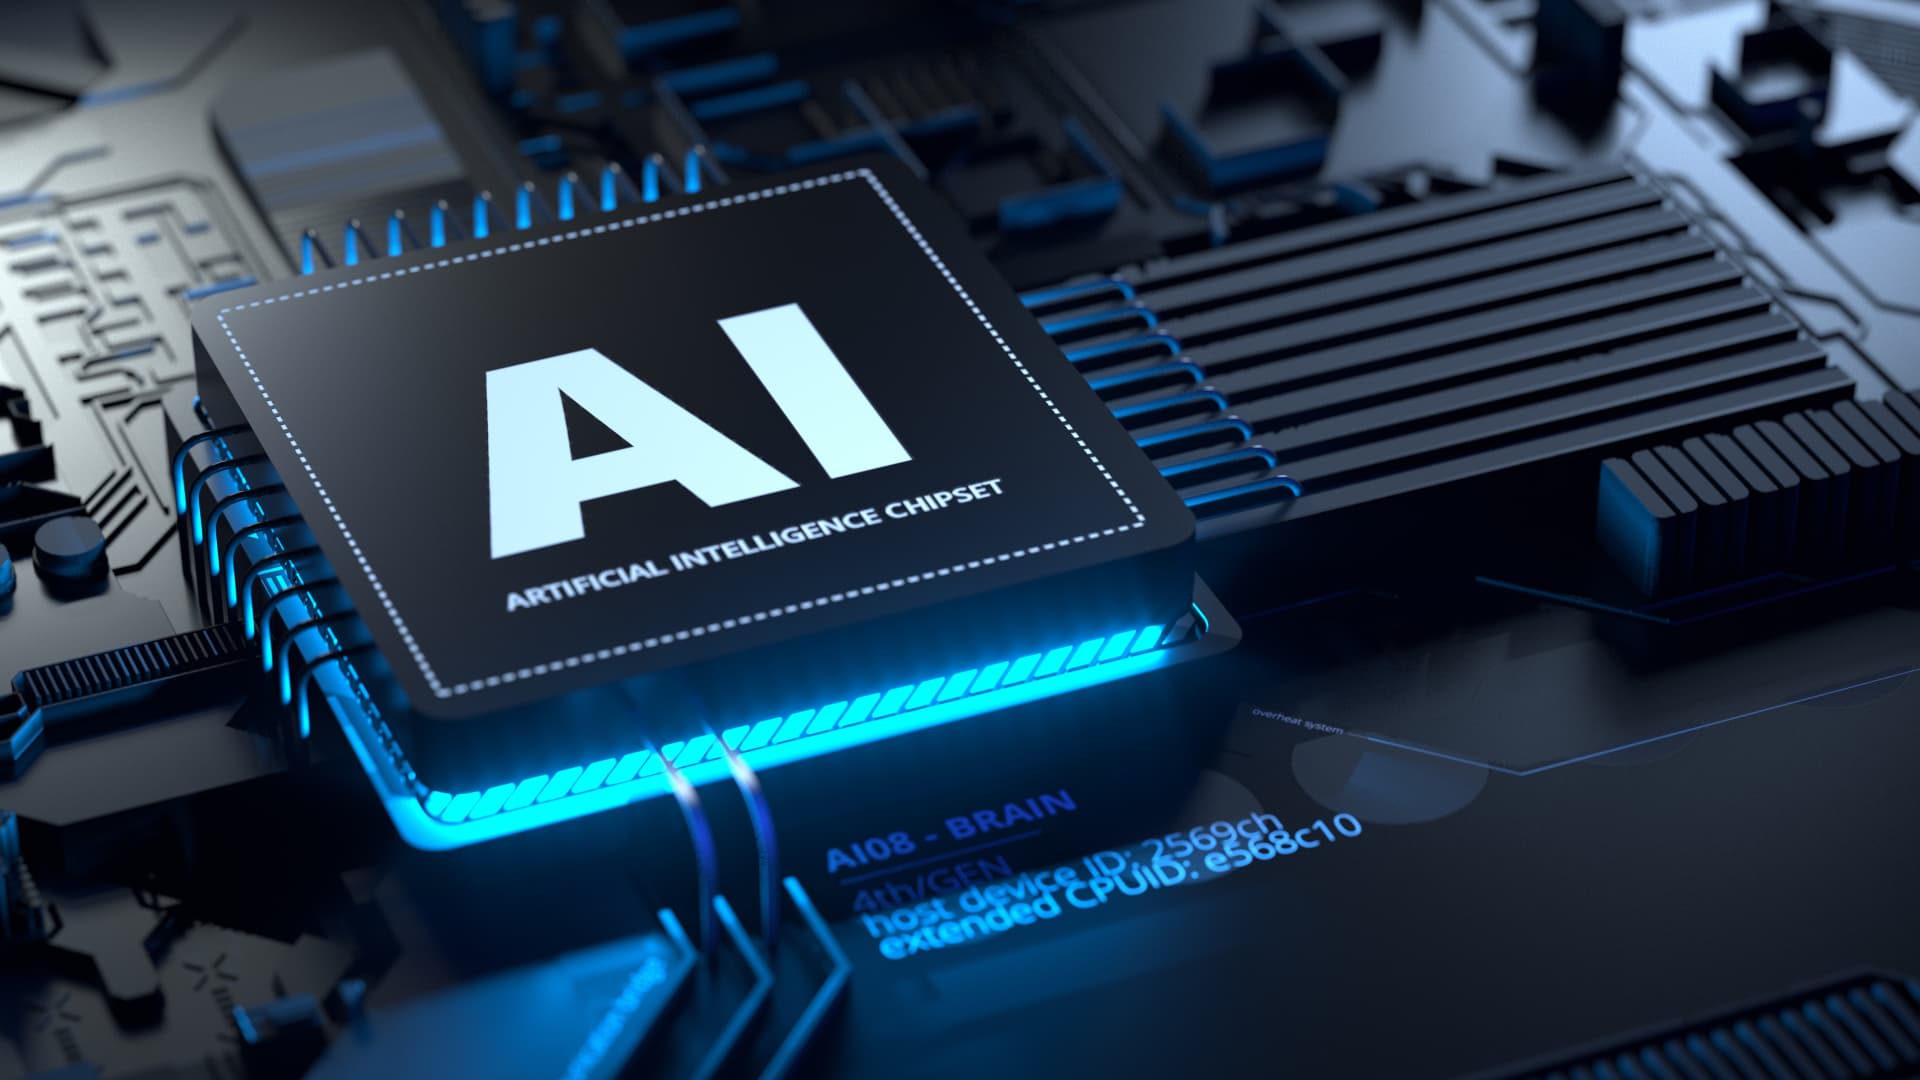 14 analysts upgraded this global AI chip stock in the past 2 weeks